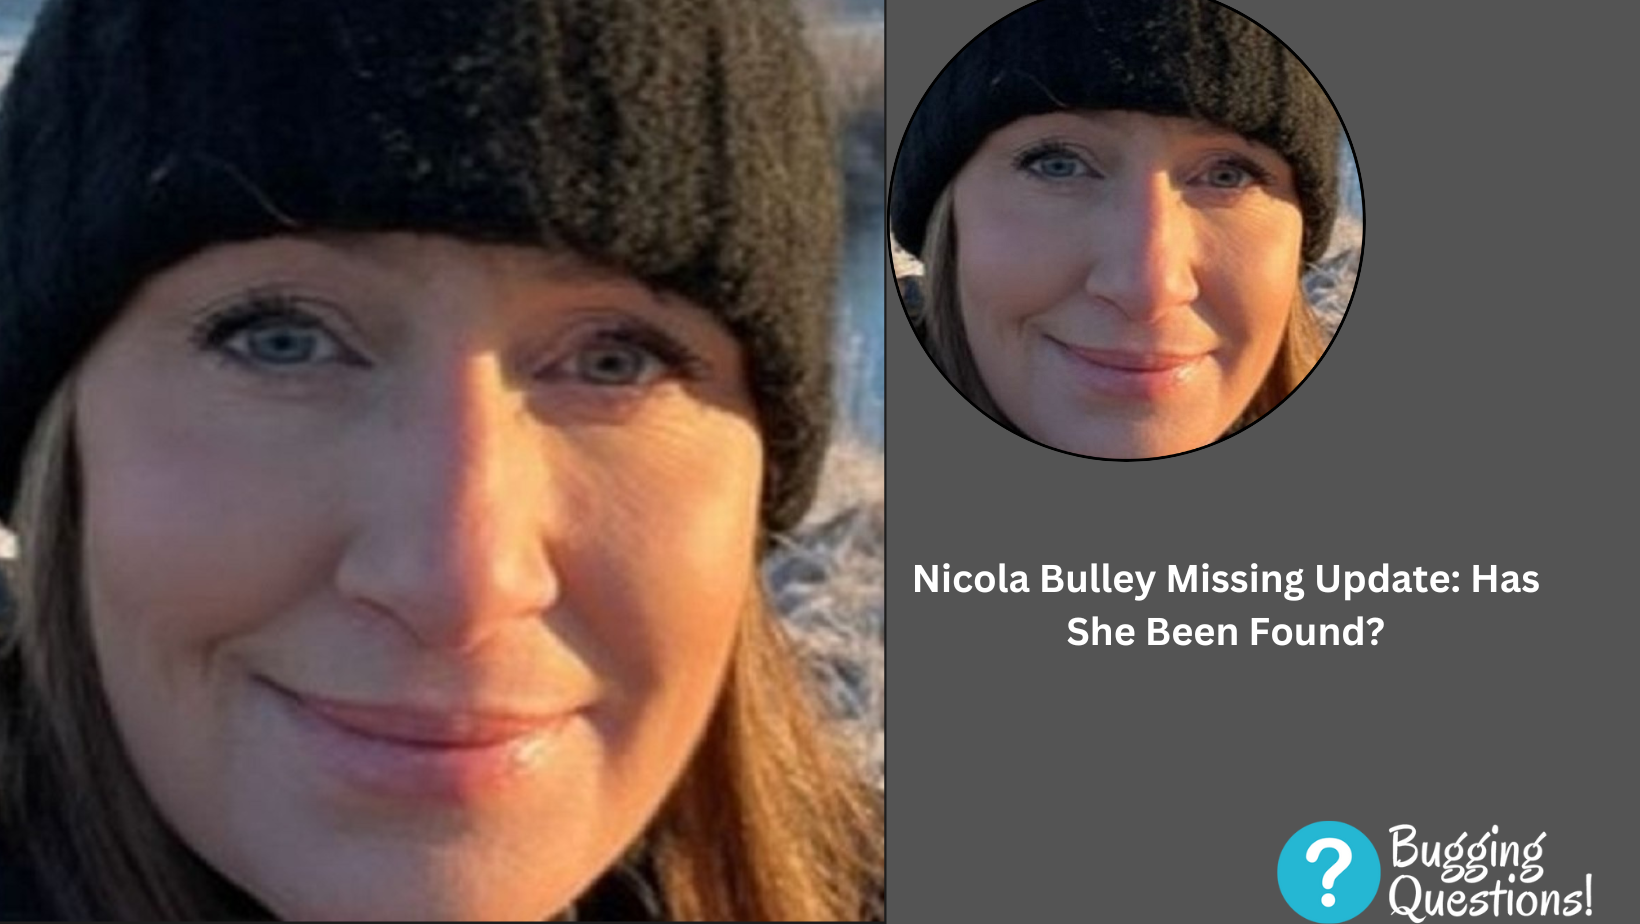 Nicola Bulley Missing Update: Has She Been Found?